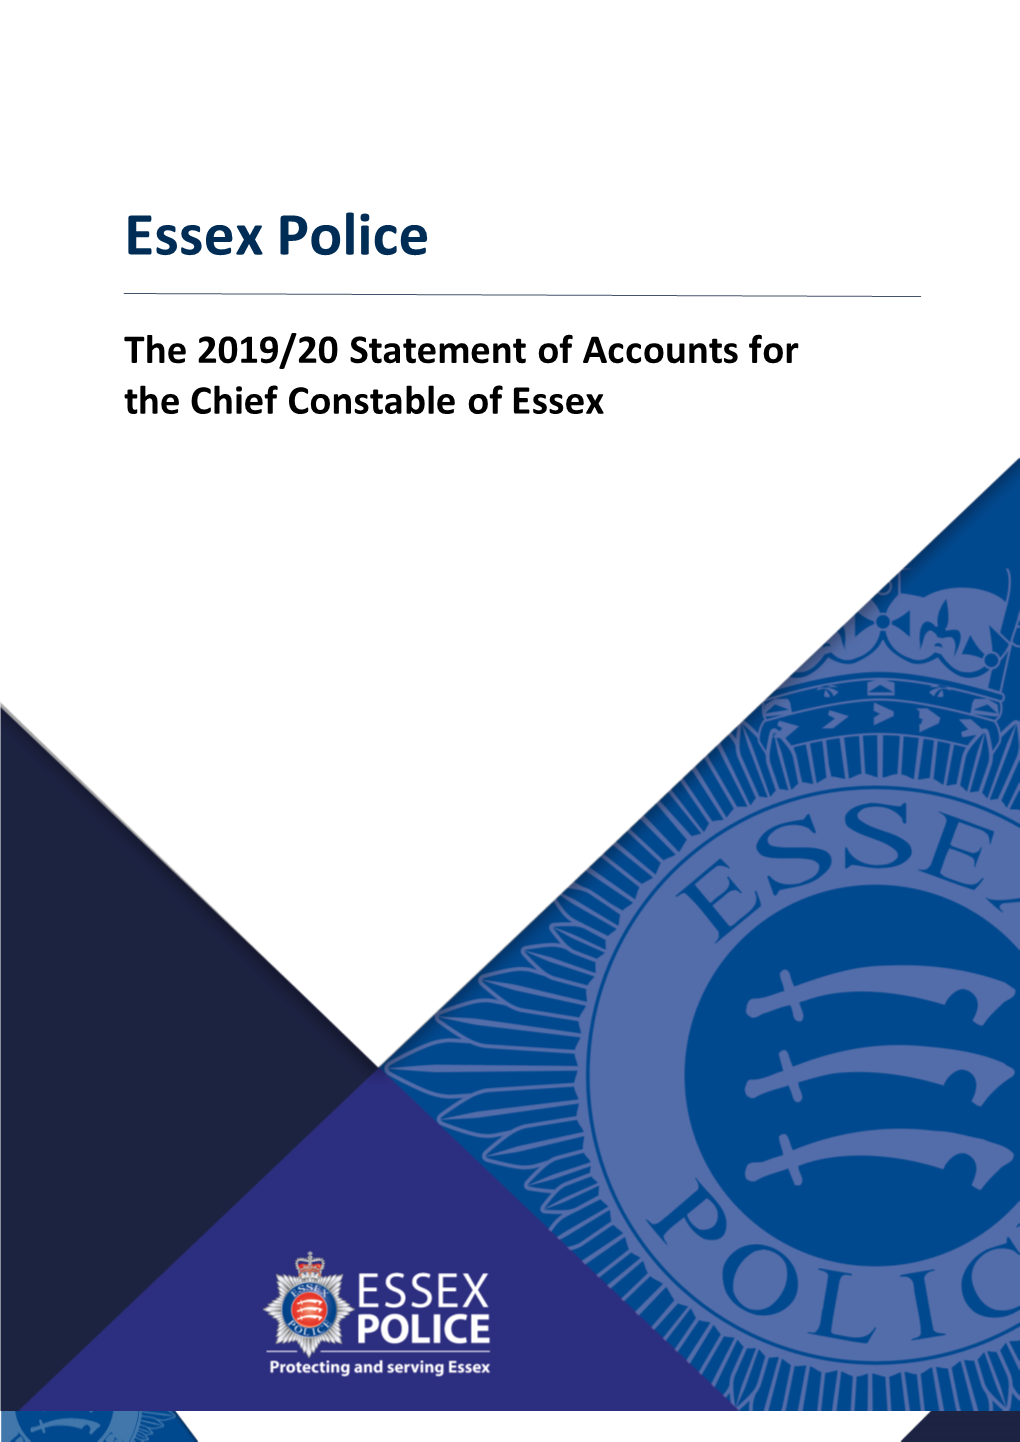 Chief Constable of Essex Police Statement of Accounts 2019-20